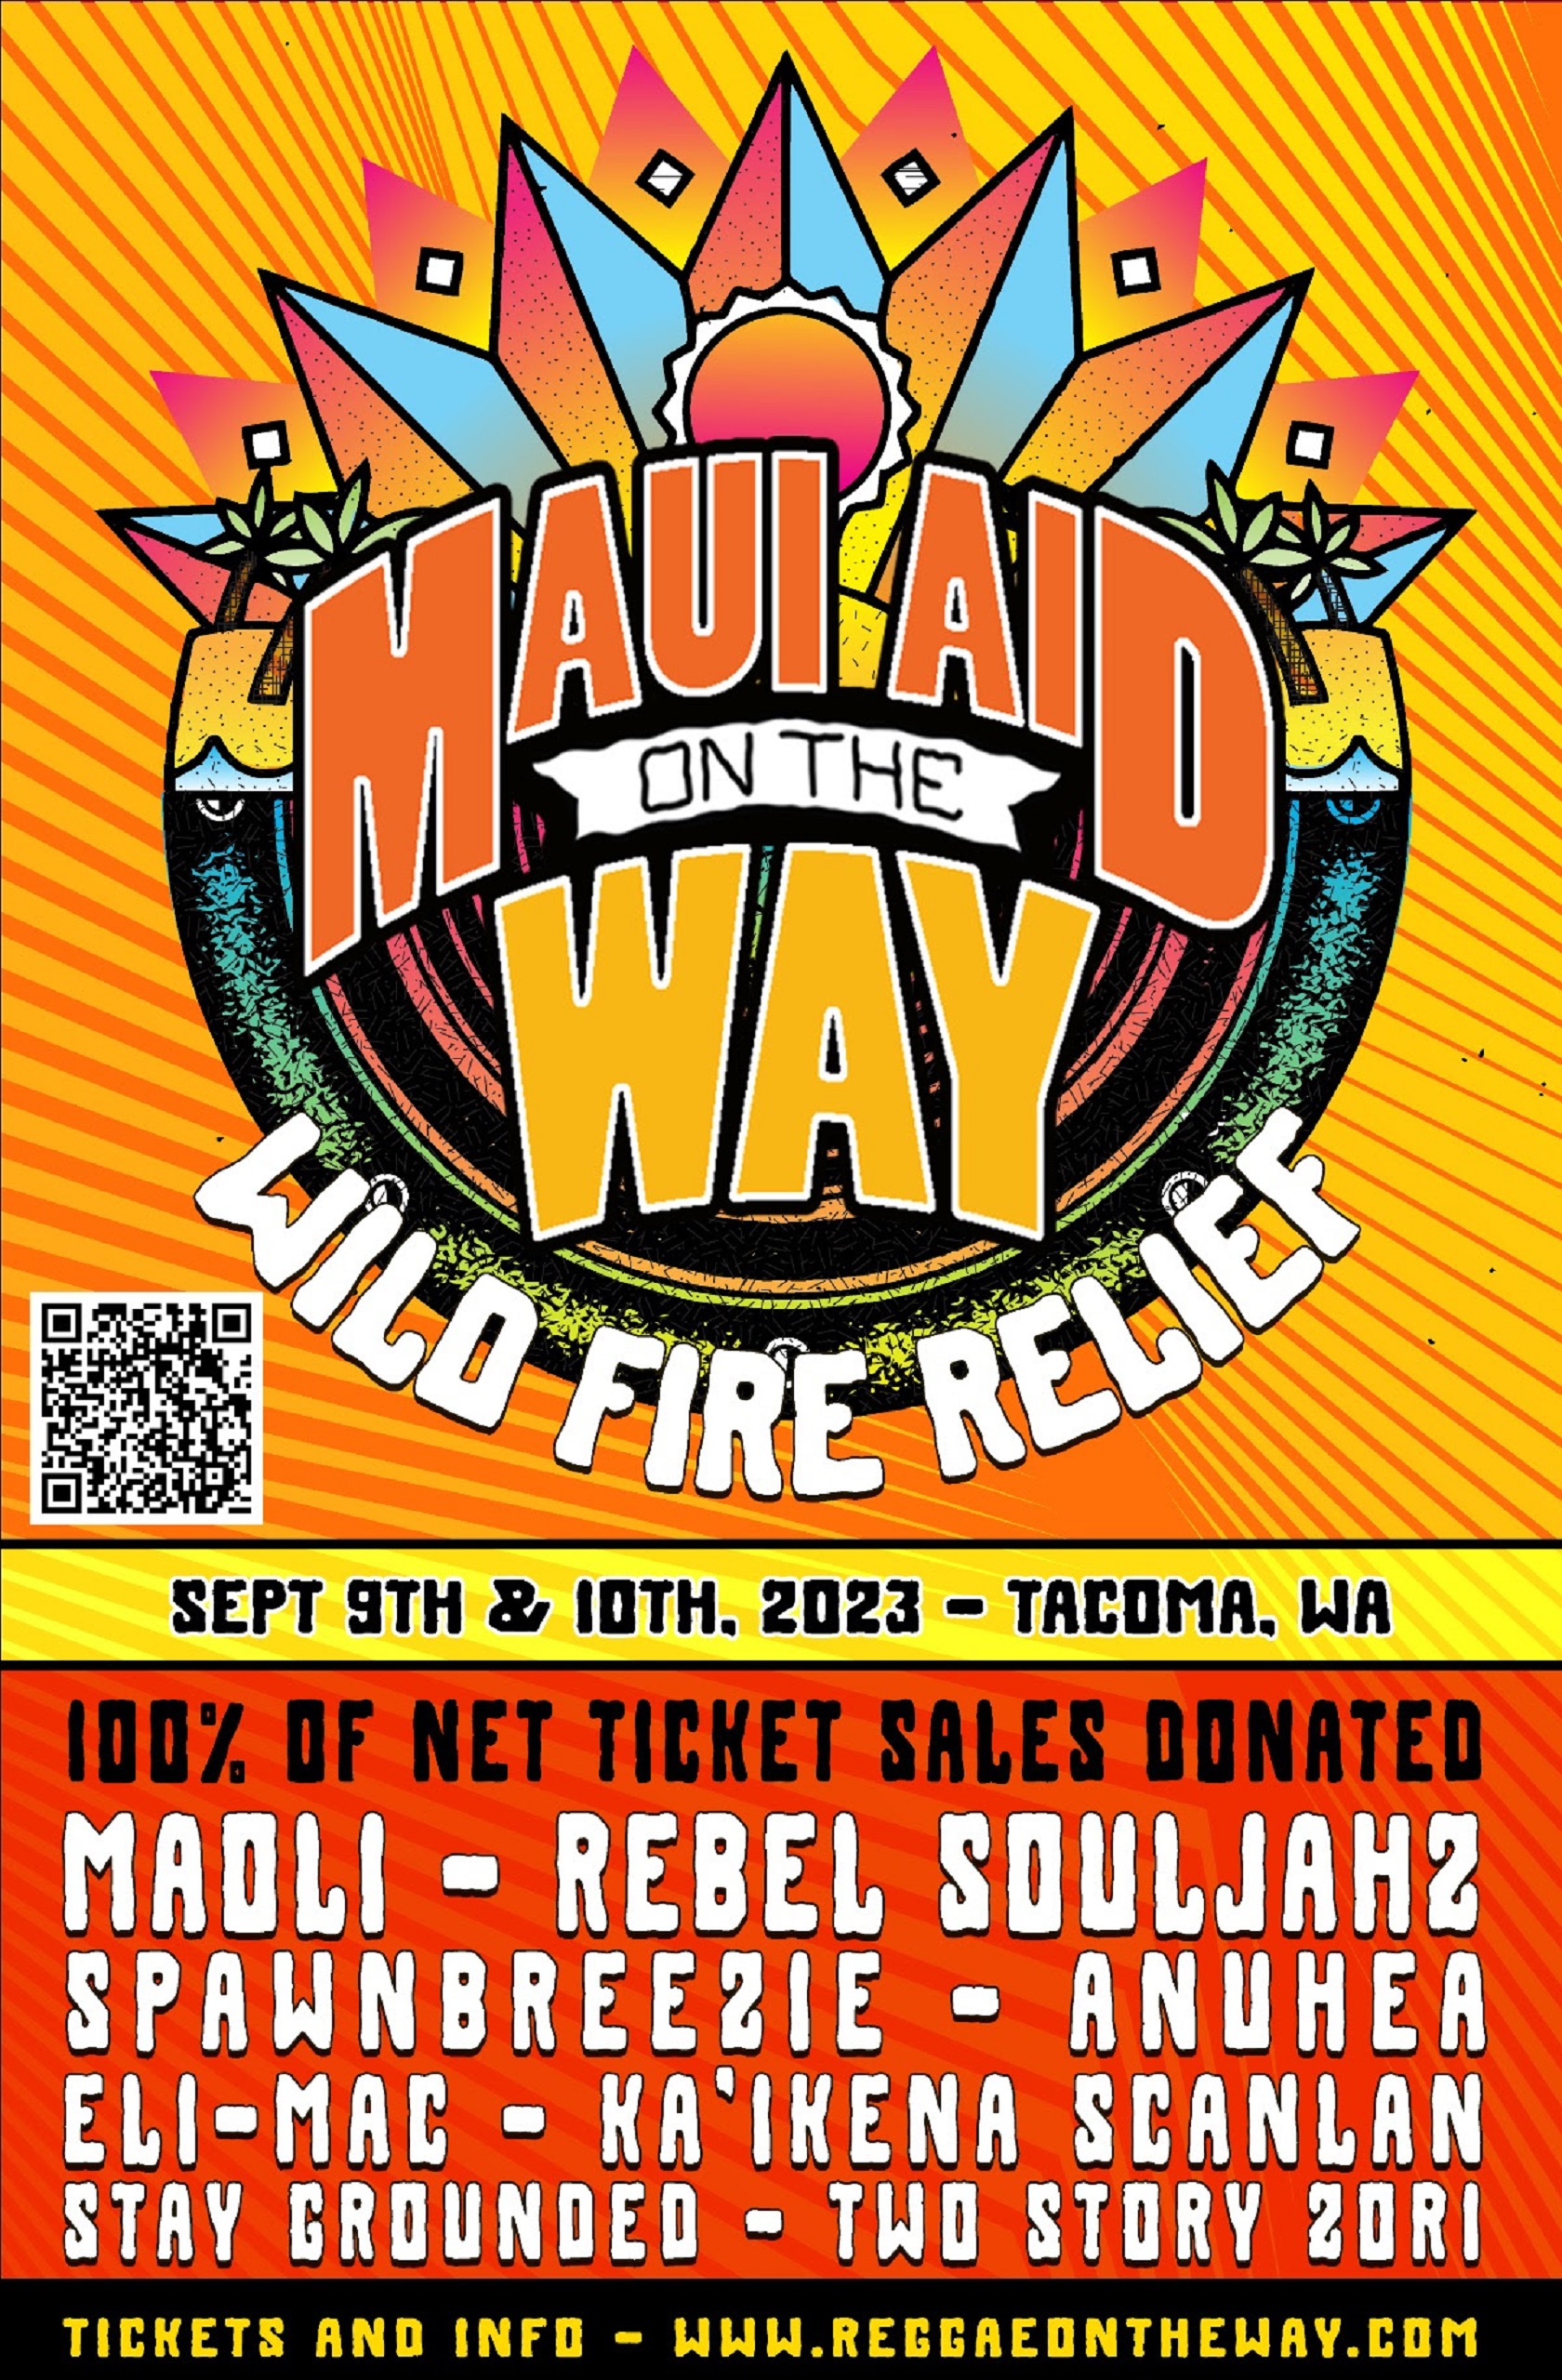 REGGAE ON THE WAY PRESENTS "MAUI AID ON THE WAY: WILD FIRE RELIEF CONCERT"